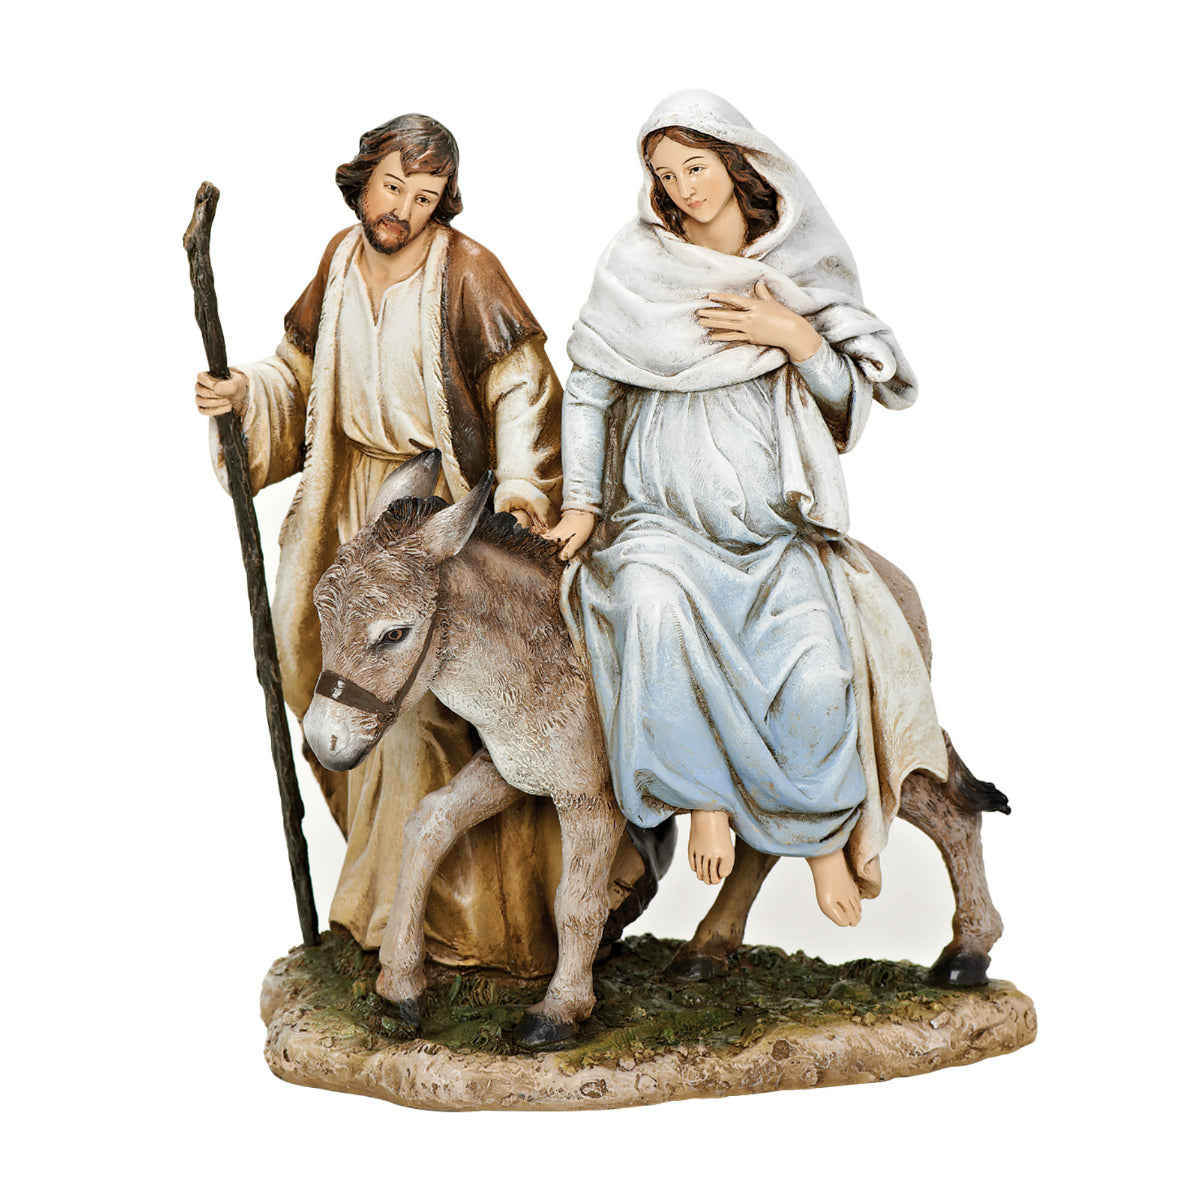 Statues of The Holy Family